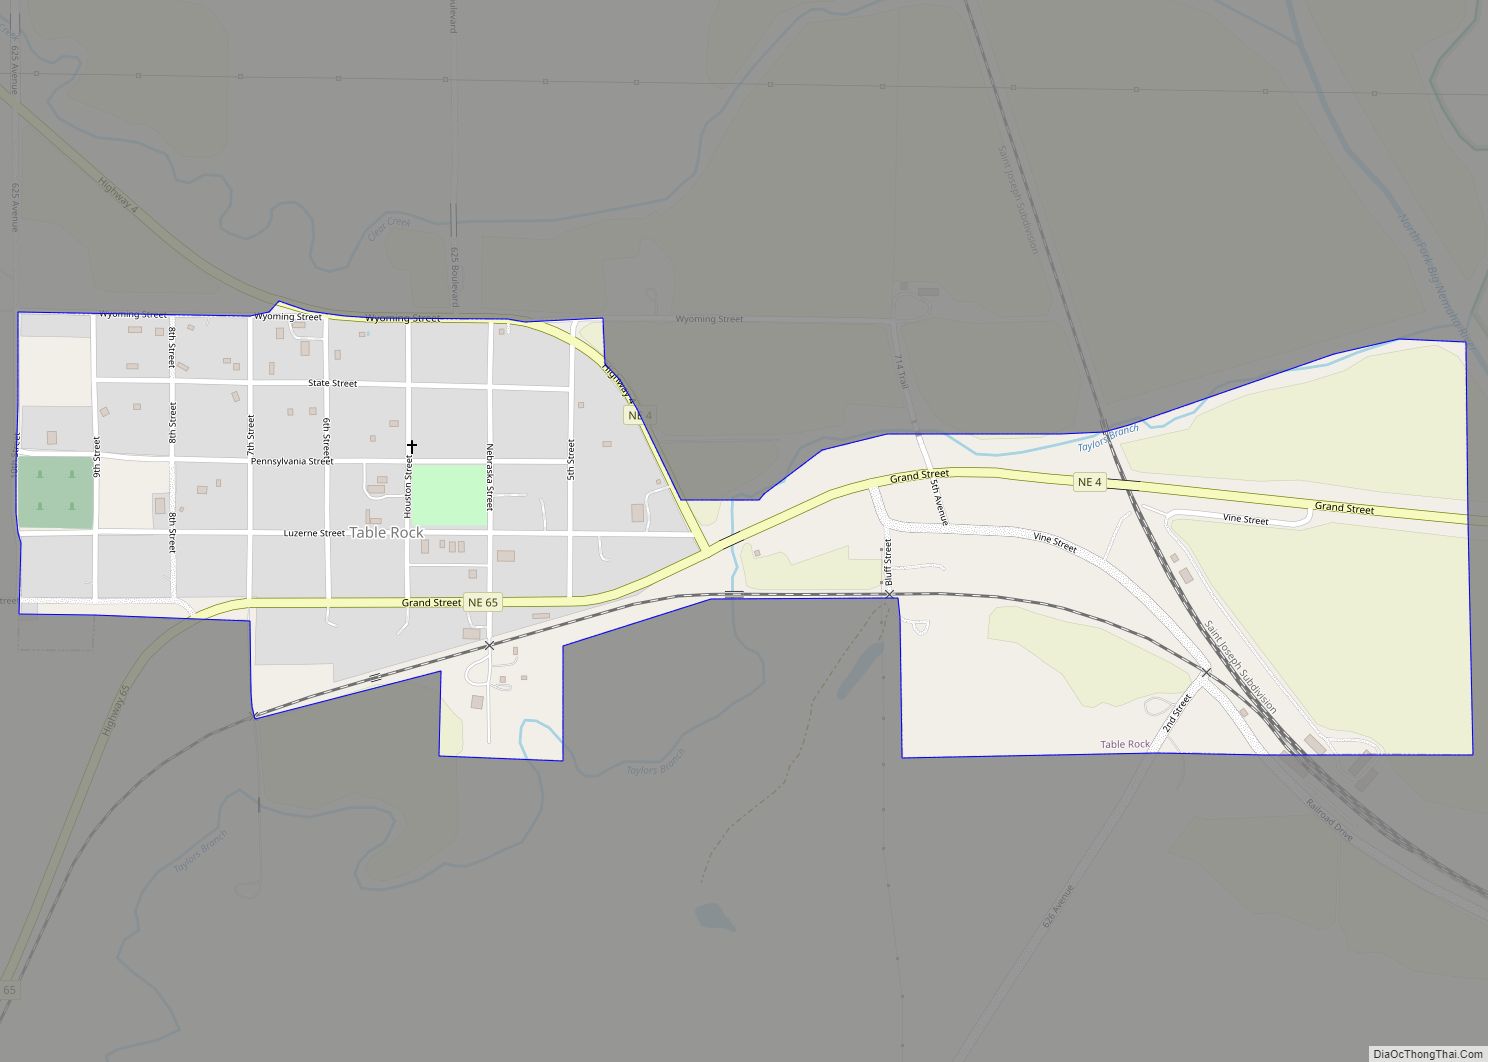 Map of Table Rock village